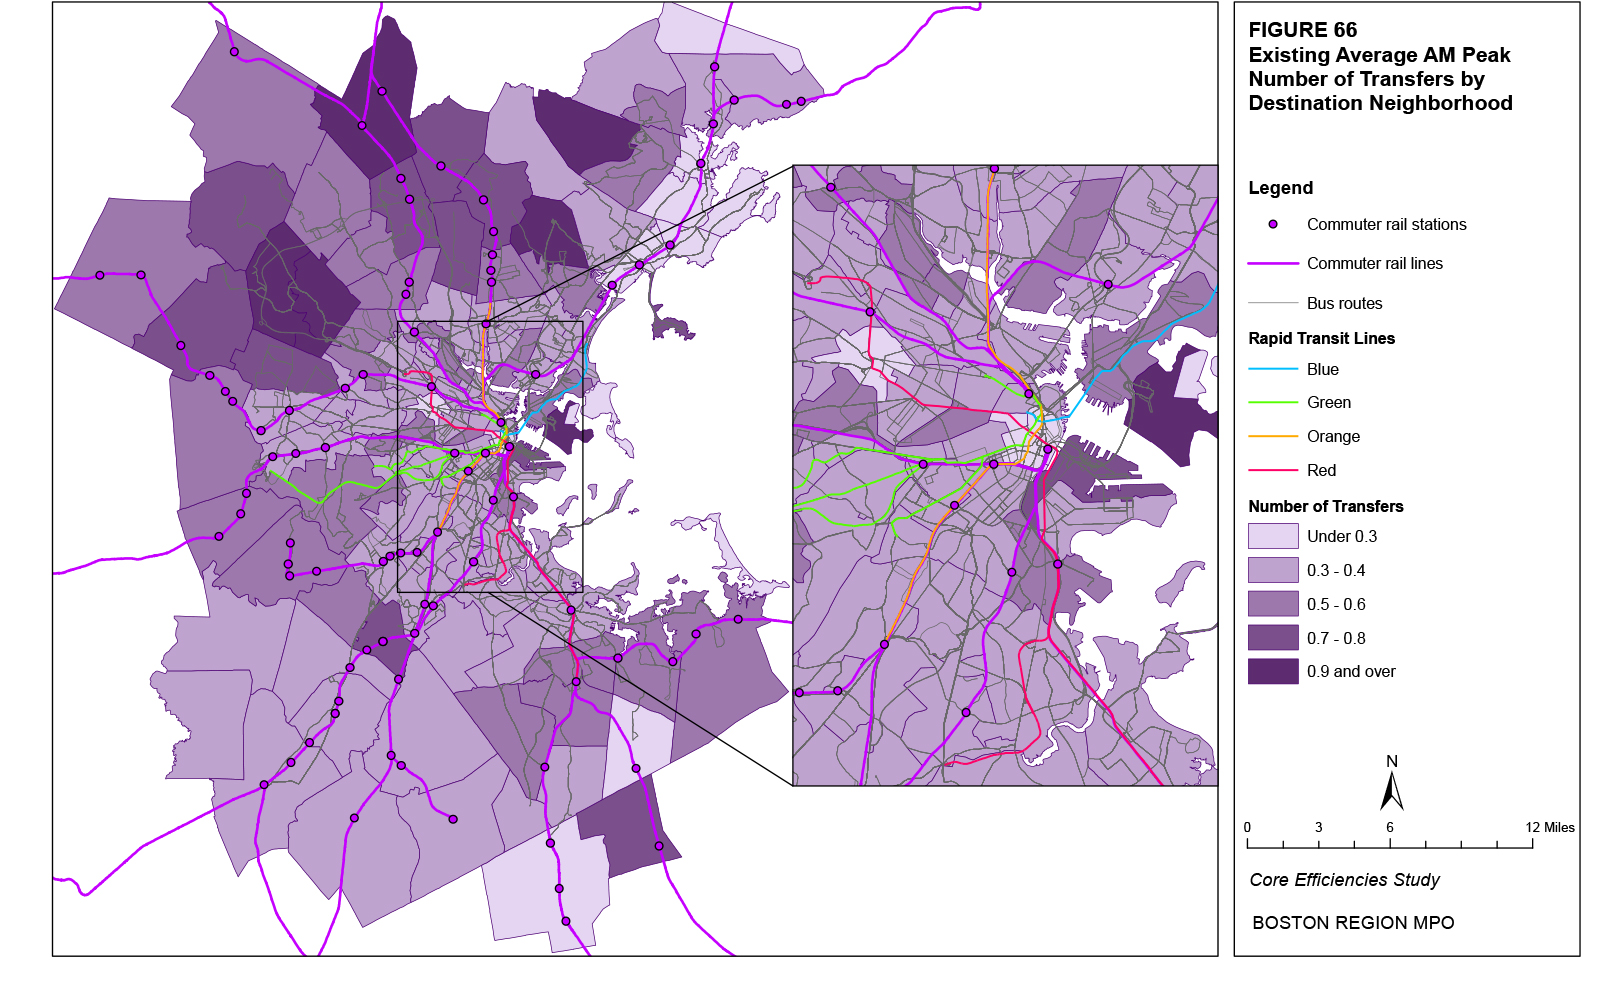 This map shows the existing average AM peak number of transfers for destination trips by neighborhood.